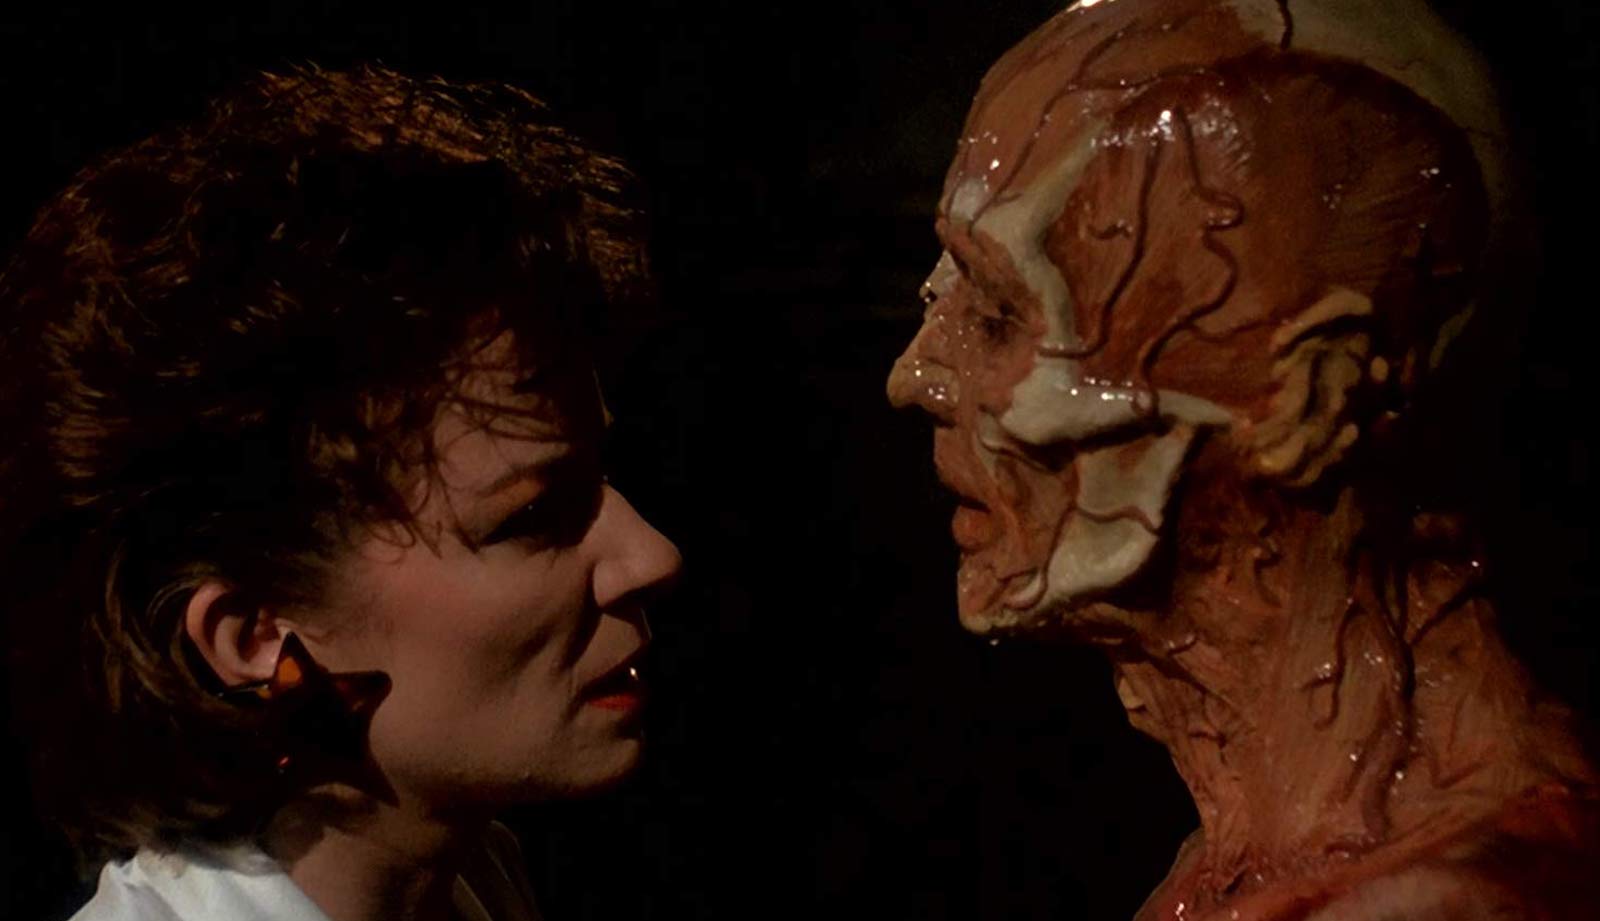 A woman and a man with a veiny, skinless face look at each other intently